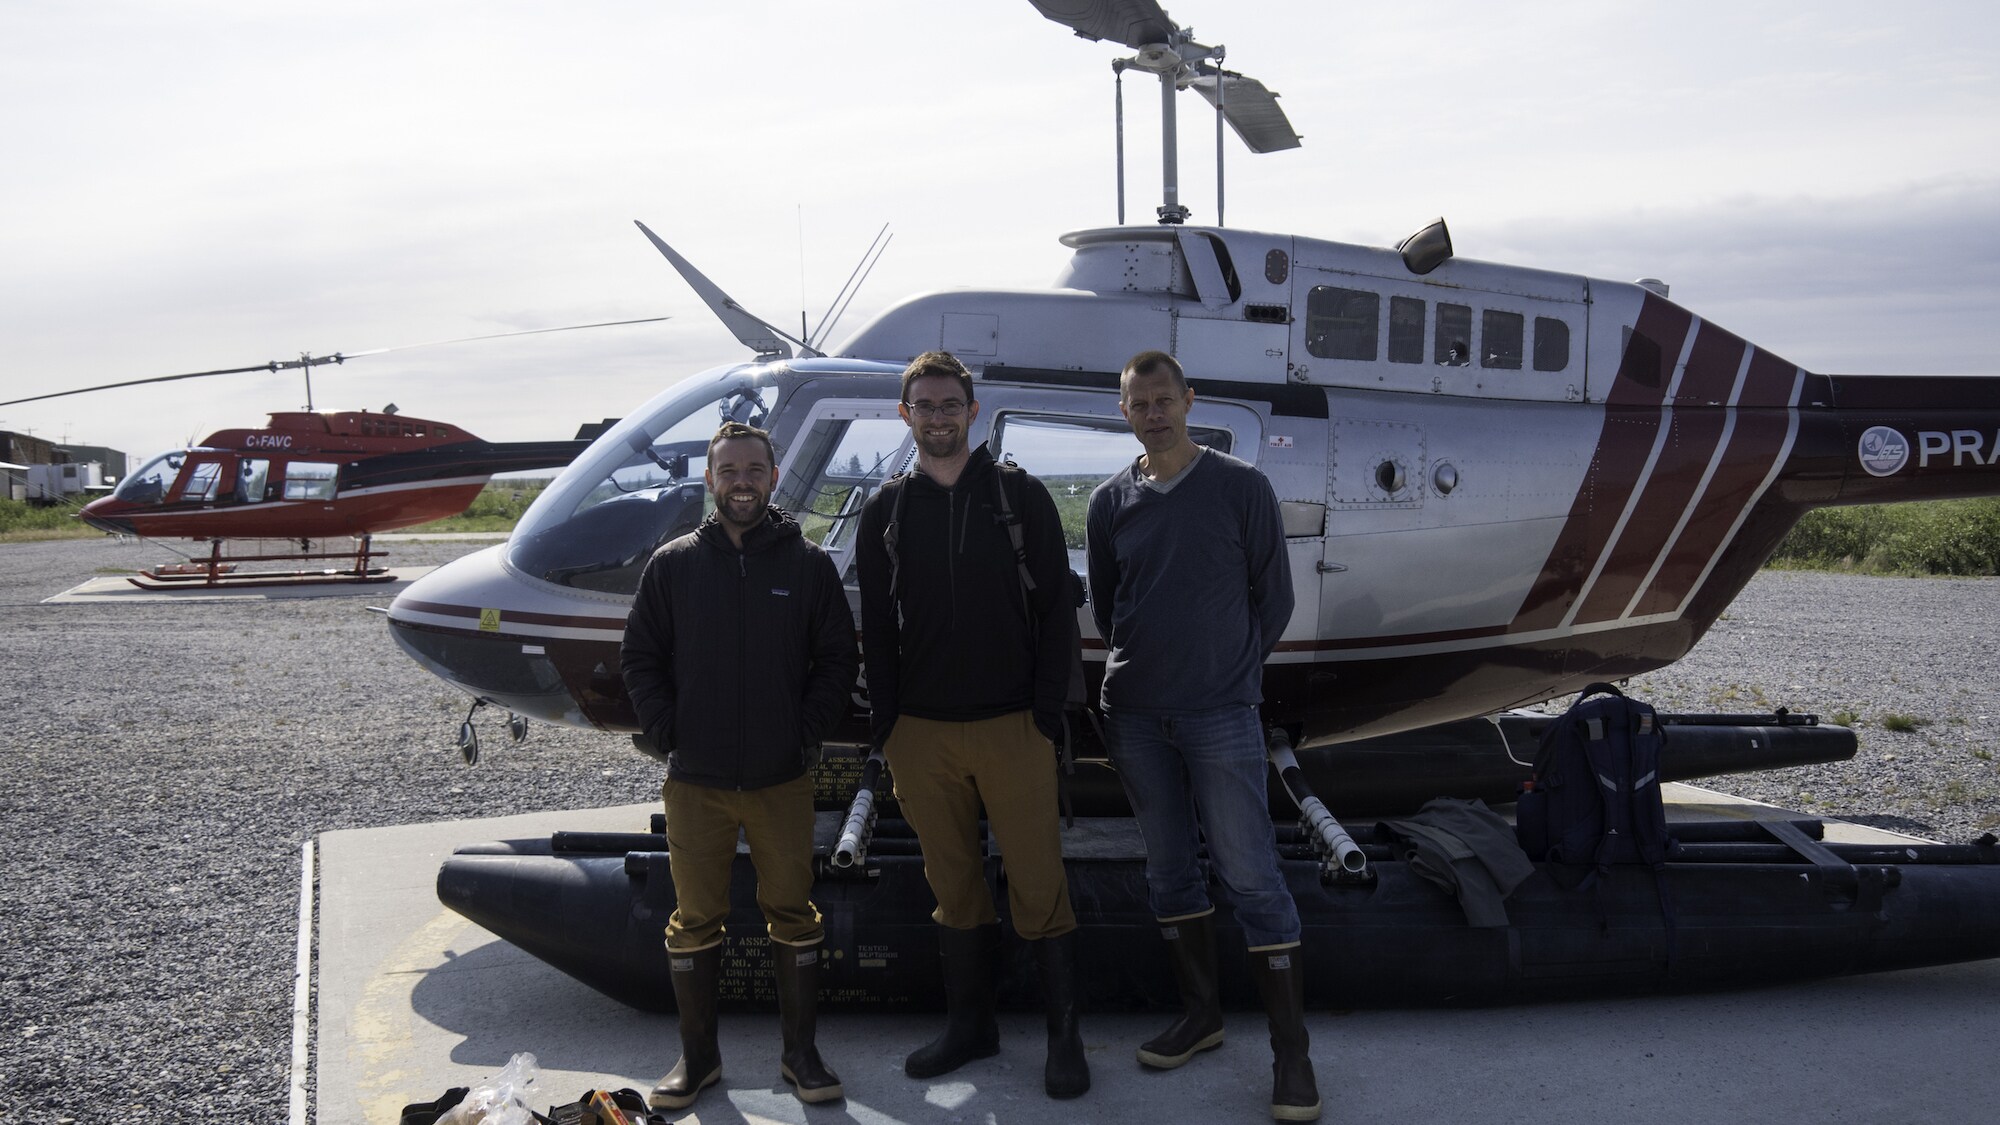 From left to right: Directors of Photography Hayes Baxley, Owen Bissell, and Peter Kragh prepare to film belugas in remote West Hudson Bay. (National Geographic for Disney+/Hayes Baxley)